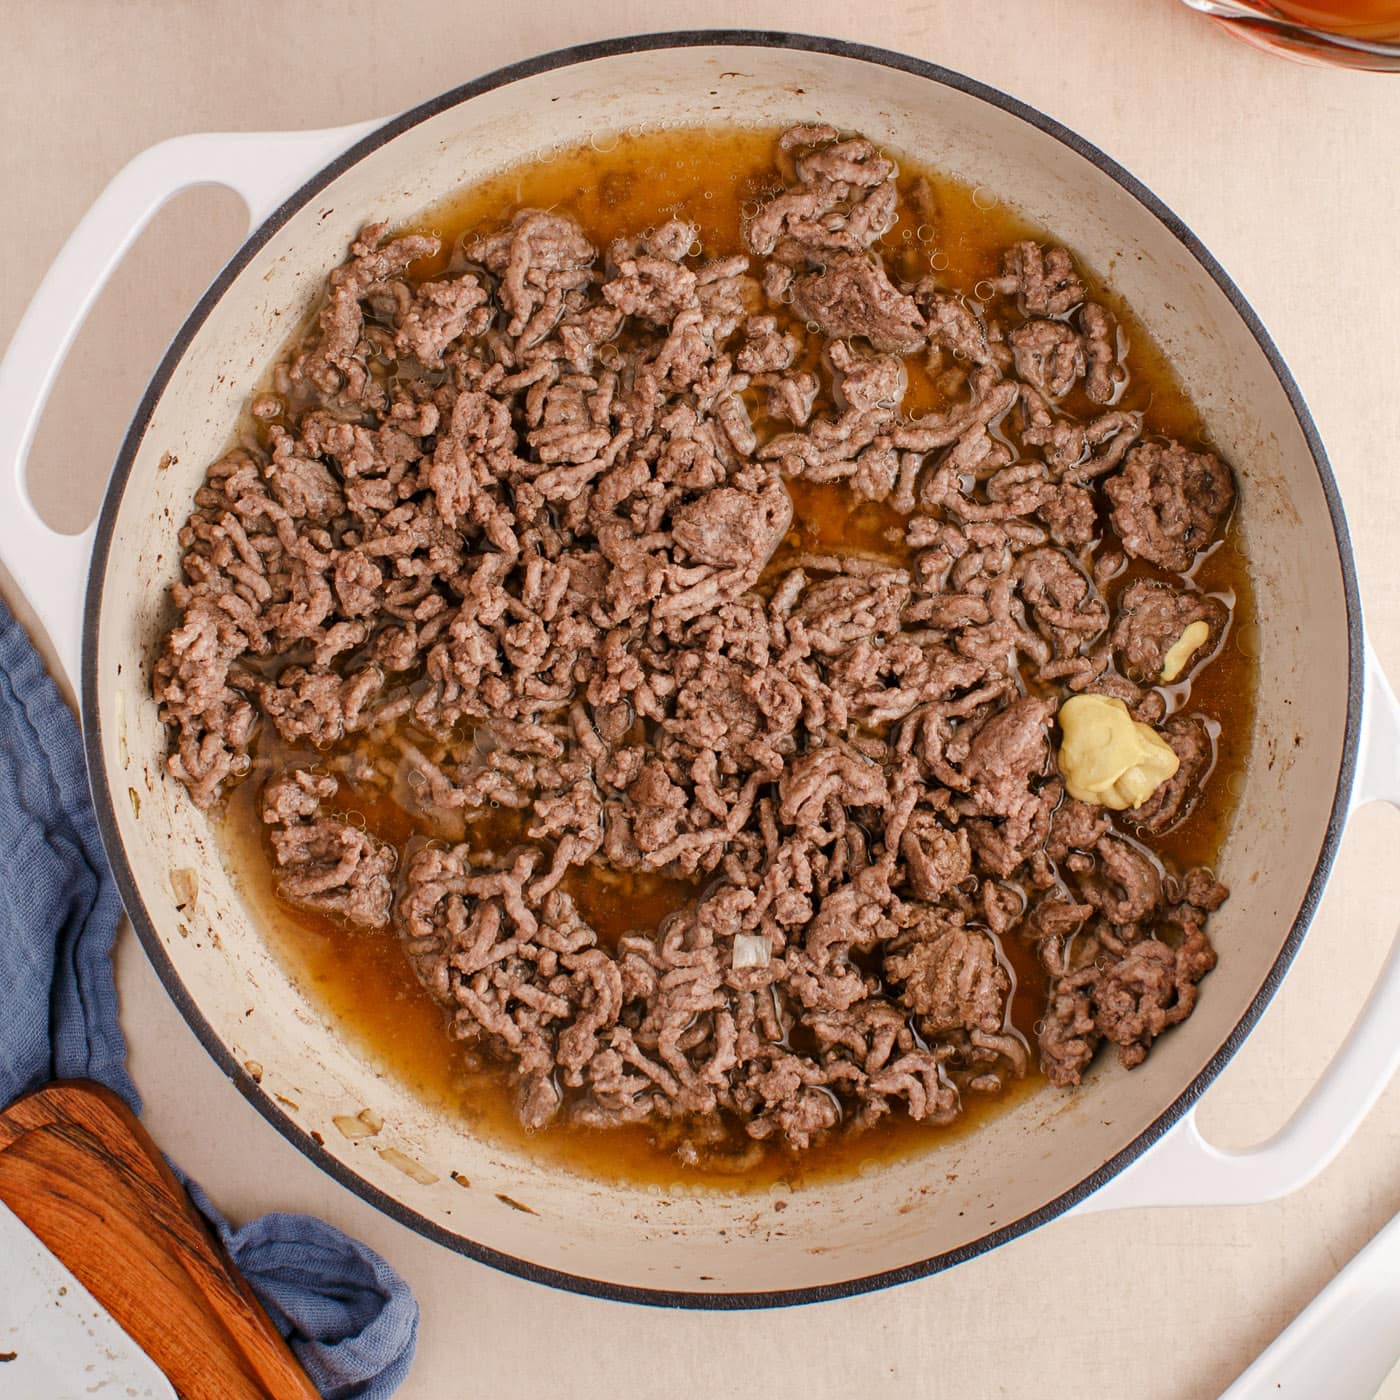 Dijon, worcestershire, beef broth and ground beef in a skillet